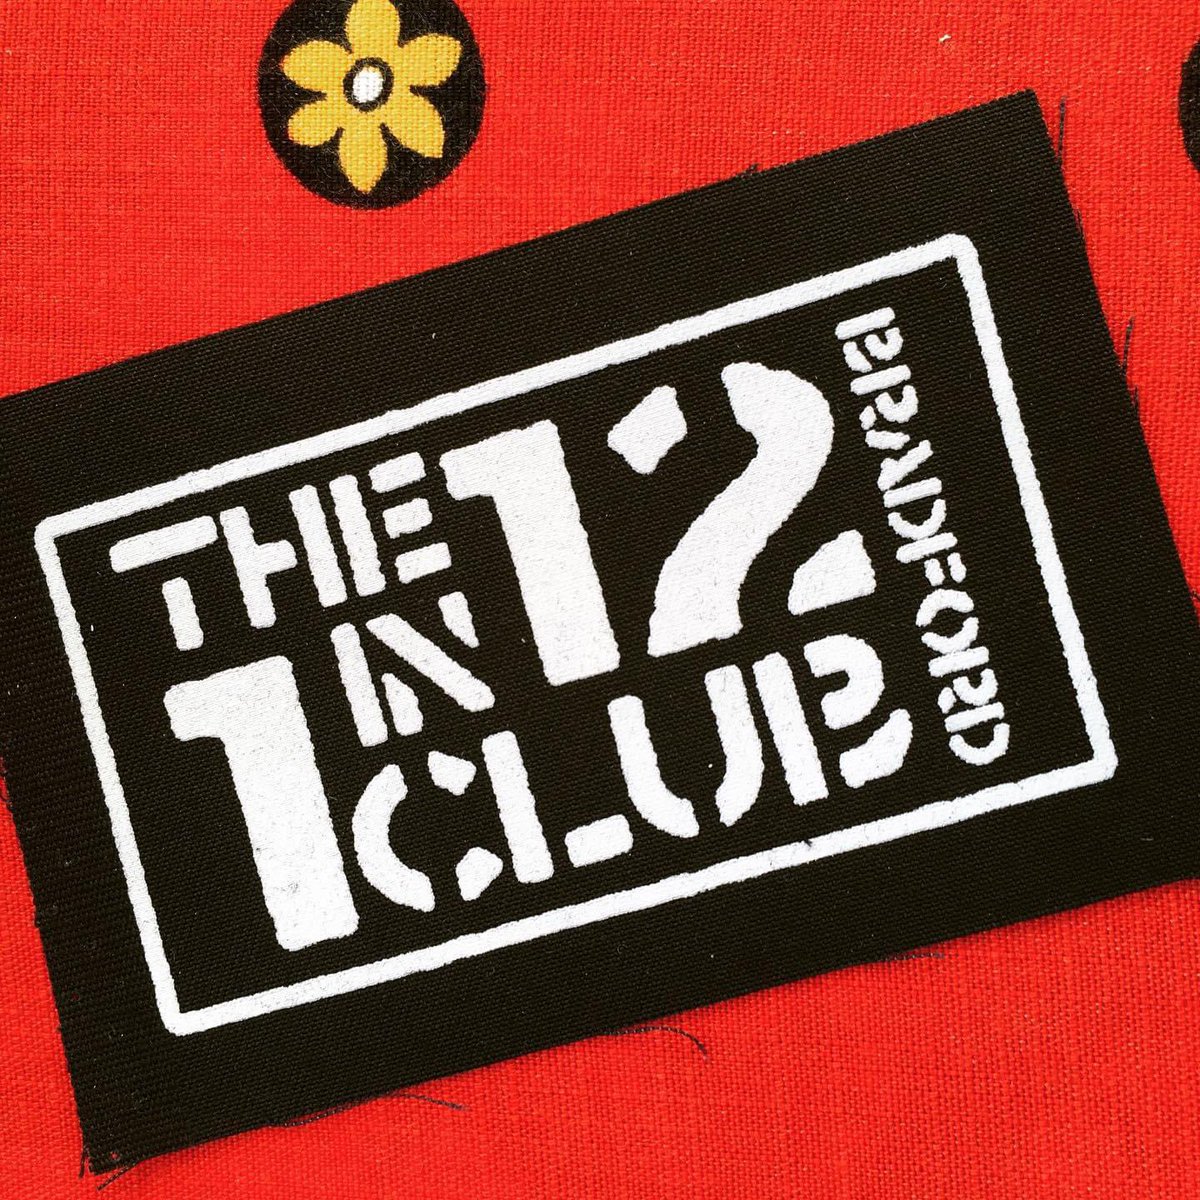 Support the mighty 1 in 12 Club Bradford via this crowdfunder. They need to raise 20k -> justgiving.com/crowdfunding/1…